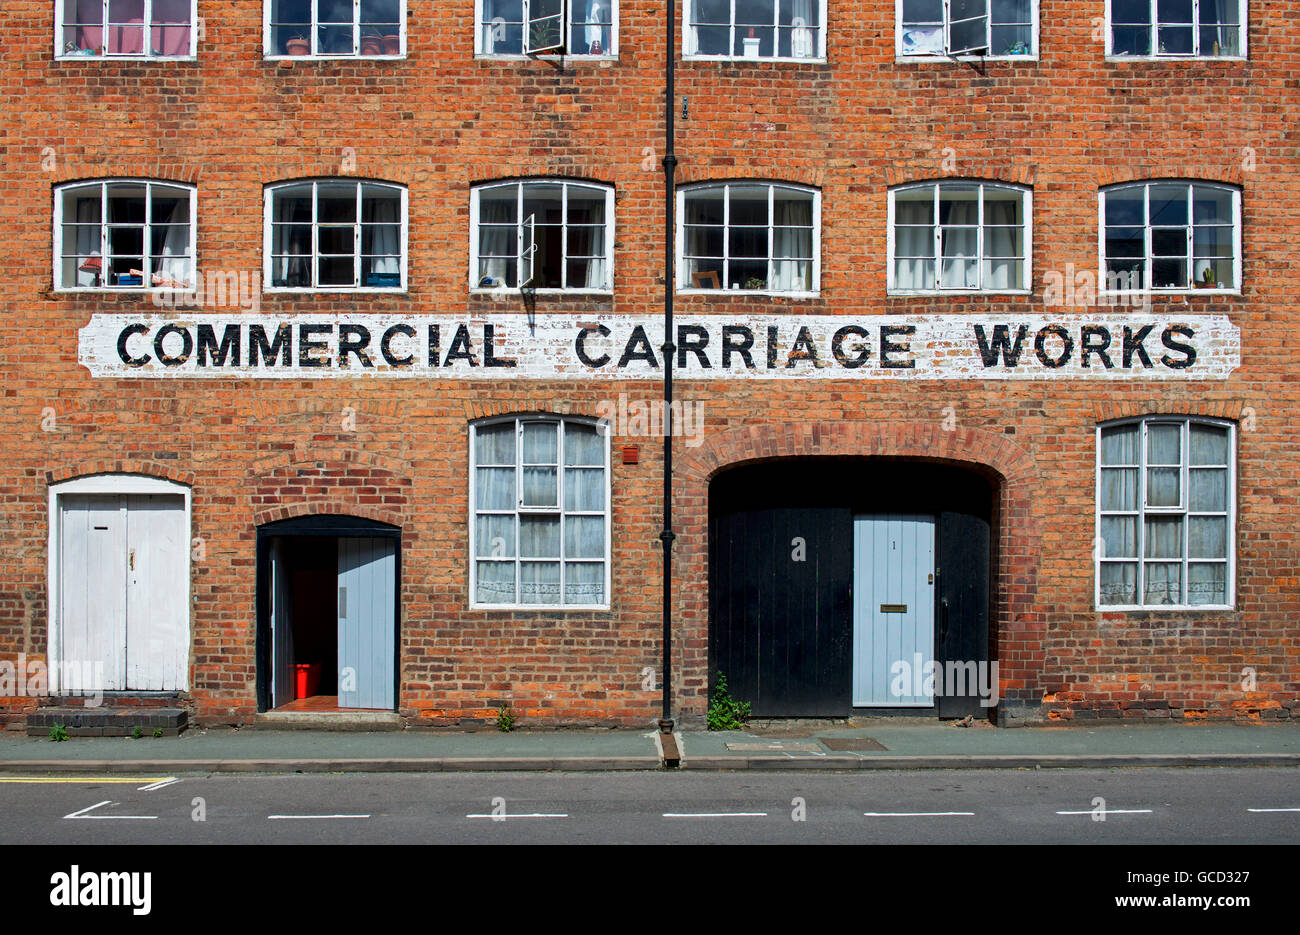 Industrial building - commercial carriage works - Newtown, Powys, Wales UK Stock Photo